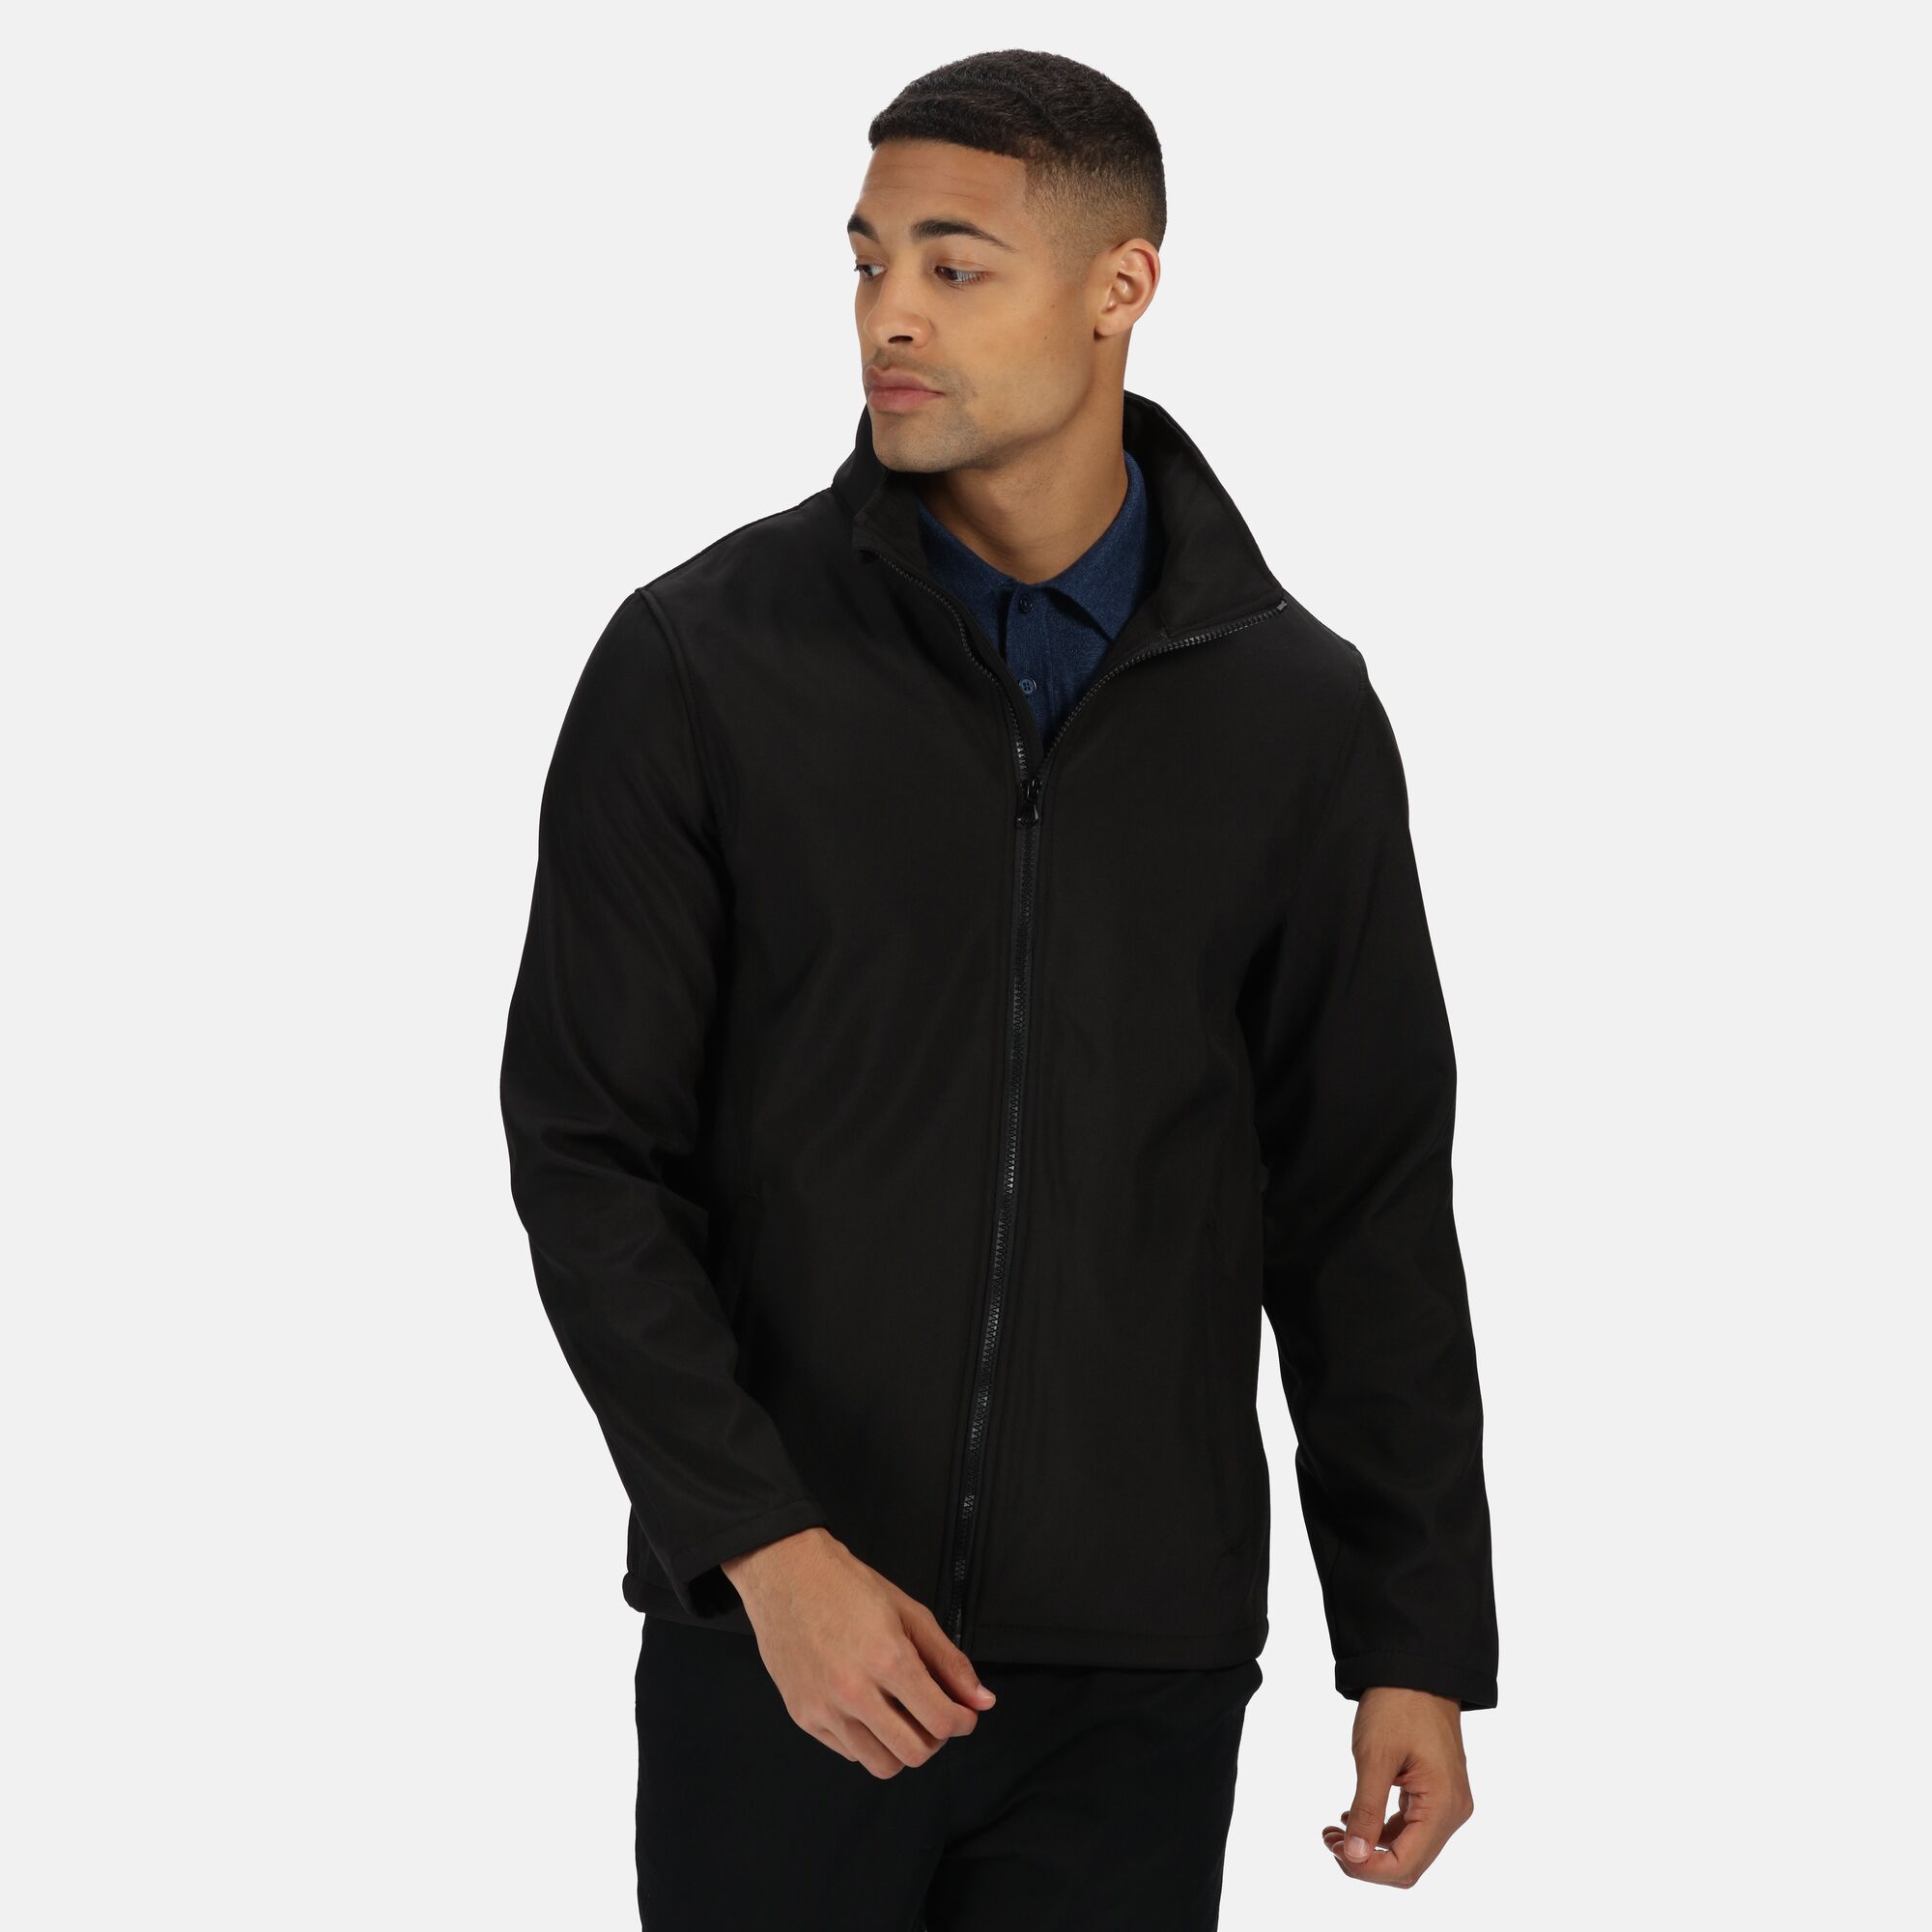 100% Polyester. Warm backed woven softshell jacket. Printable softshell fabric. Wind resistant membrane fabric. Durable water repellent finish. Inner zip guard, 2 lower pockets and adjustable shockcord hem.